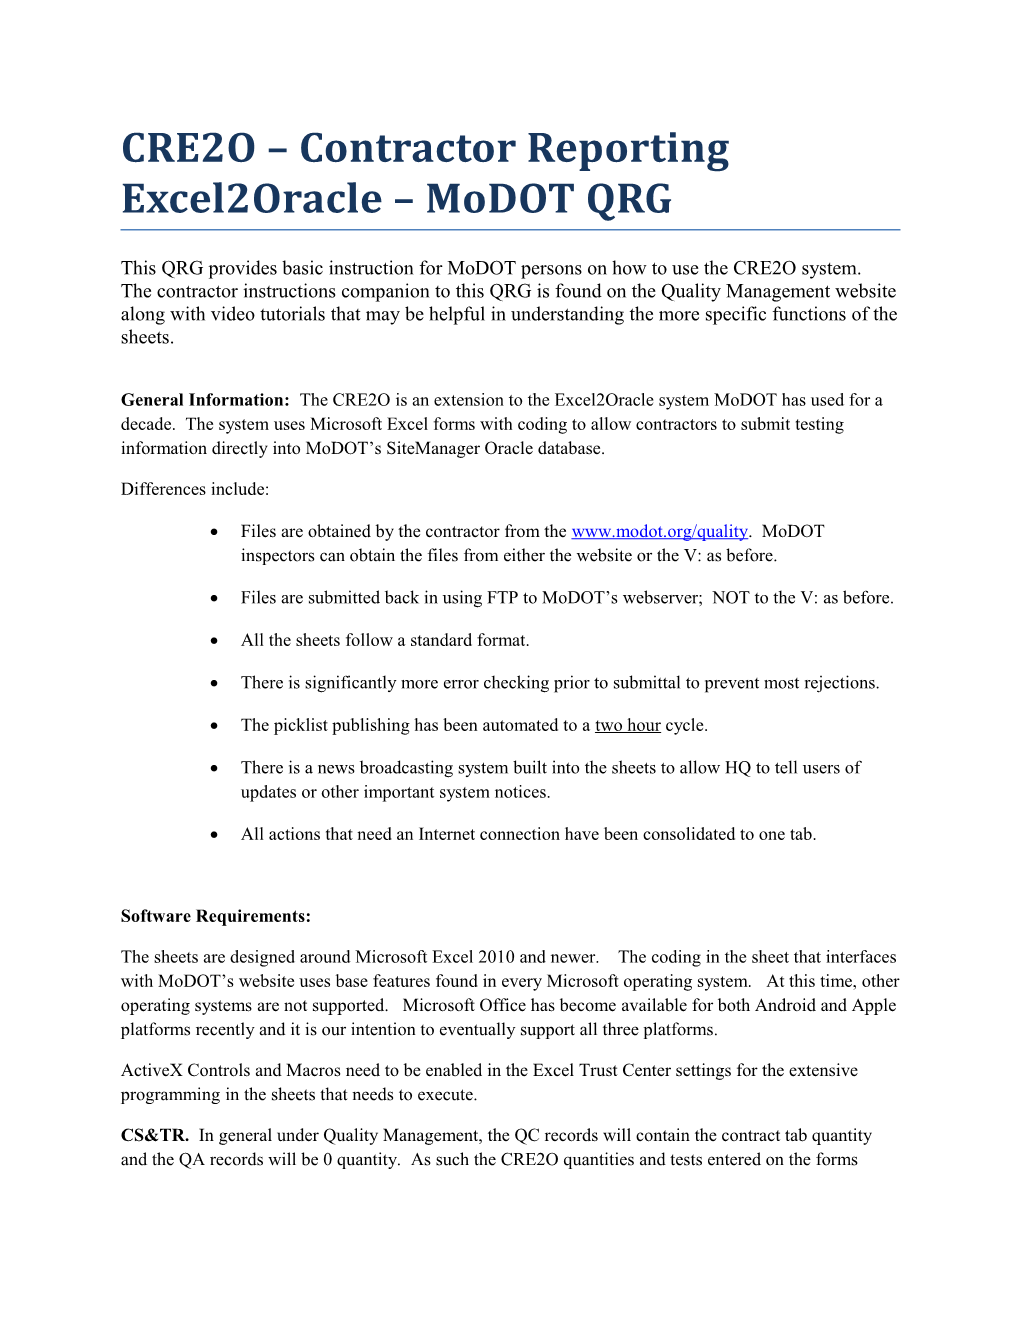 CRE2O Contractor Reporting Excel2oracle Modot QRG